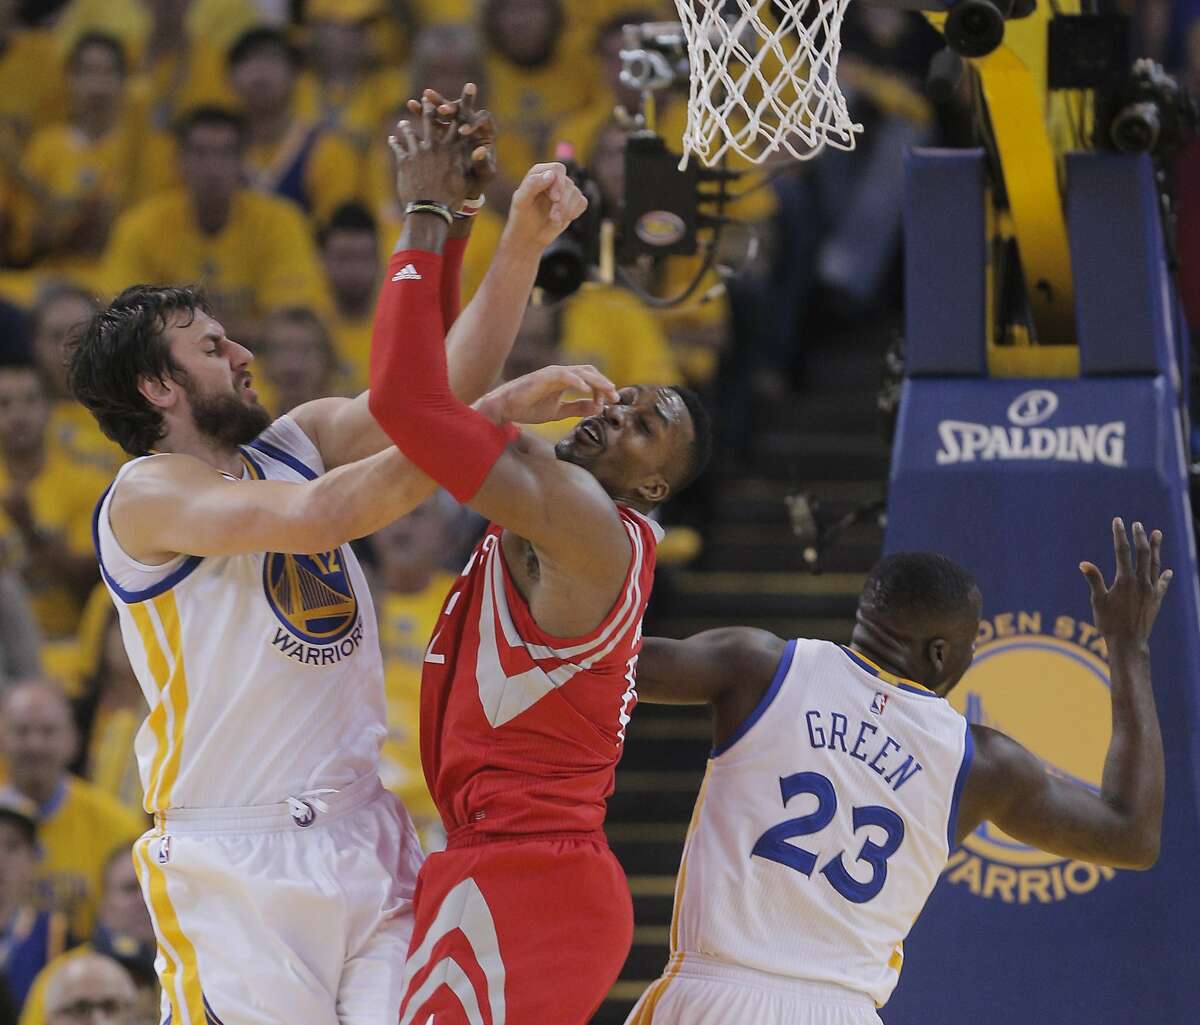 Golden State Warriors' Andrew Bogut and Houston Rockets' Dwight Howard get tangled up under the Houston basket in the first period during Game 5 of the Western Conference Finals on Wednesday, May 27, 2015 in Oakland, Calif.